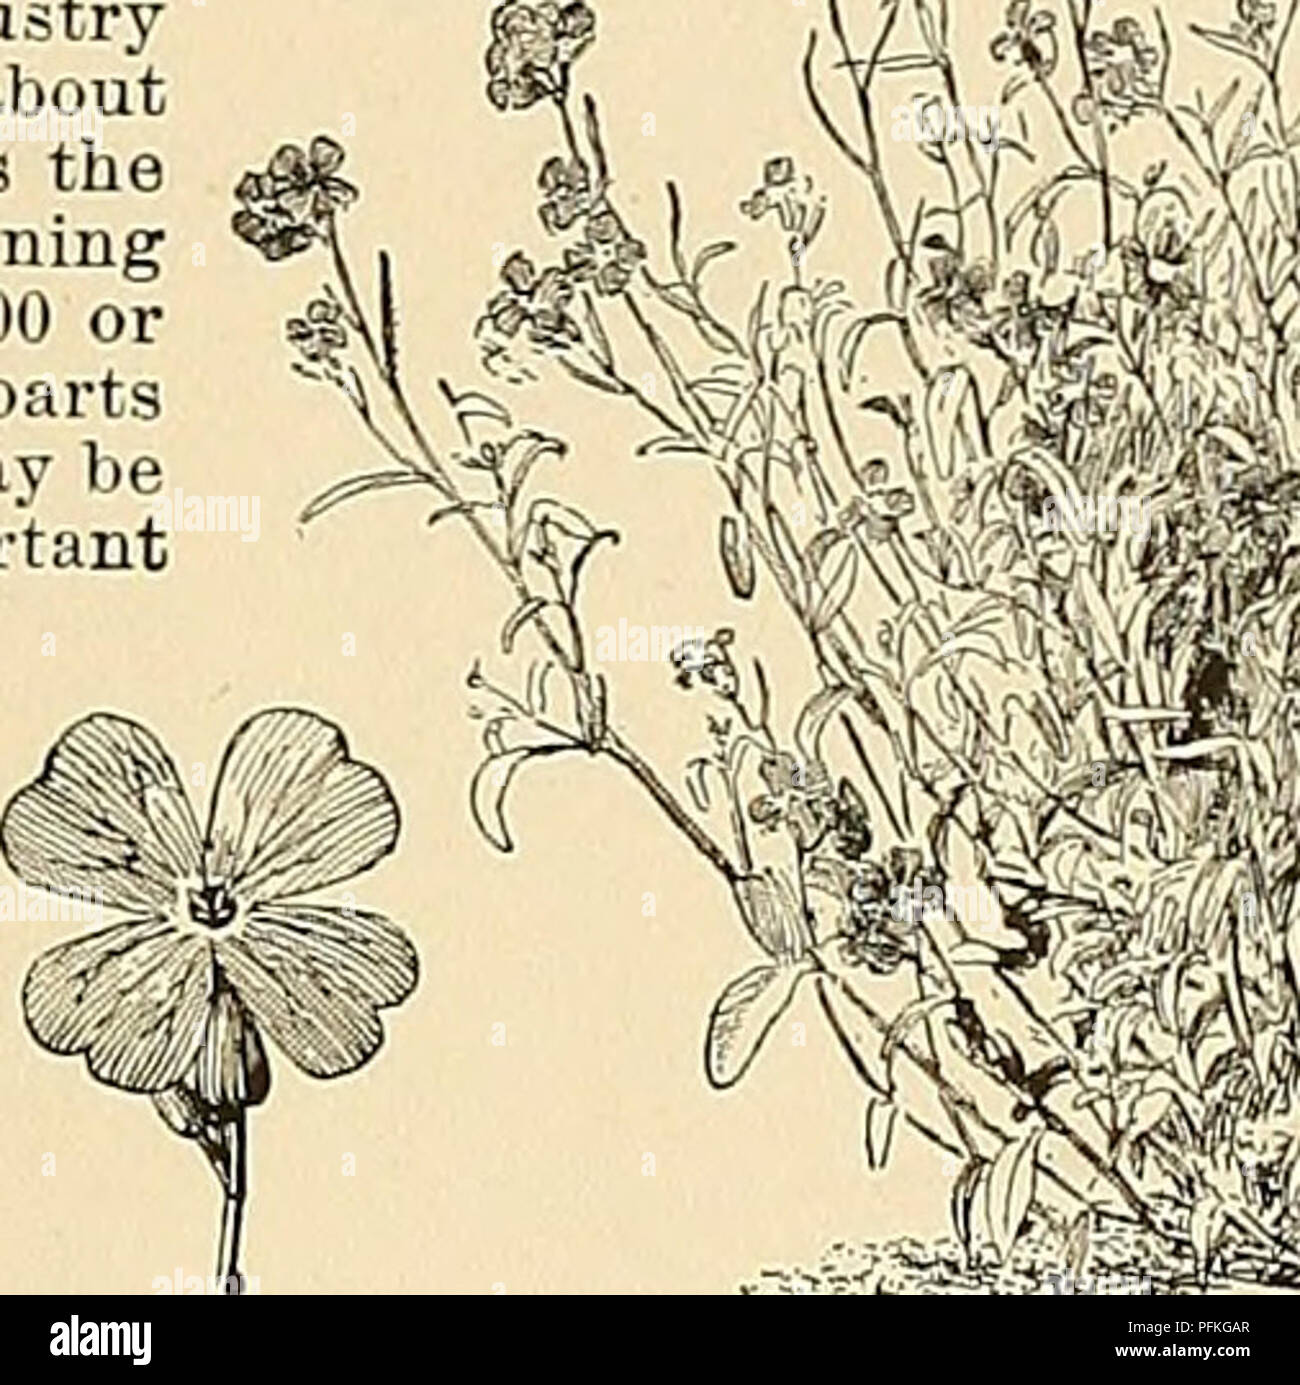 . Cyclopedia of American horticulture, comprising suggestions for cultivation of horticultural plants, descriptions of the species of fruits, vegetables, flowers, and ornamental plants sold in the United States and Canada, together with geographical and biographical sketches. Gardening. MAINE MALOPE 969 Dot far from 10,000,000 bushels. The greater portion of the potatoes grown in Aroostook county is converted into starch. The annual product of the starch factories is from 12,000,000 to 15,000,000 pounds. The average yield is about 120 bushels per acre, but as many as 500 and even 700 bushels h Stock Photo